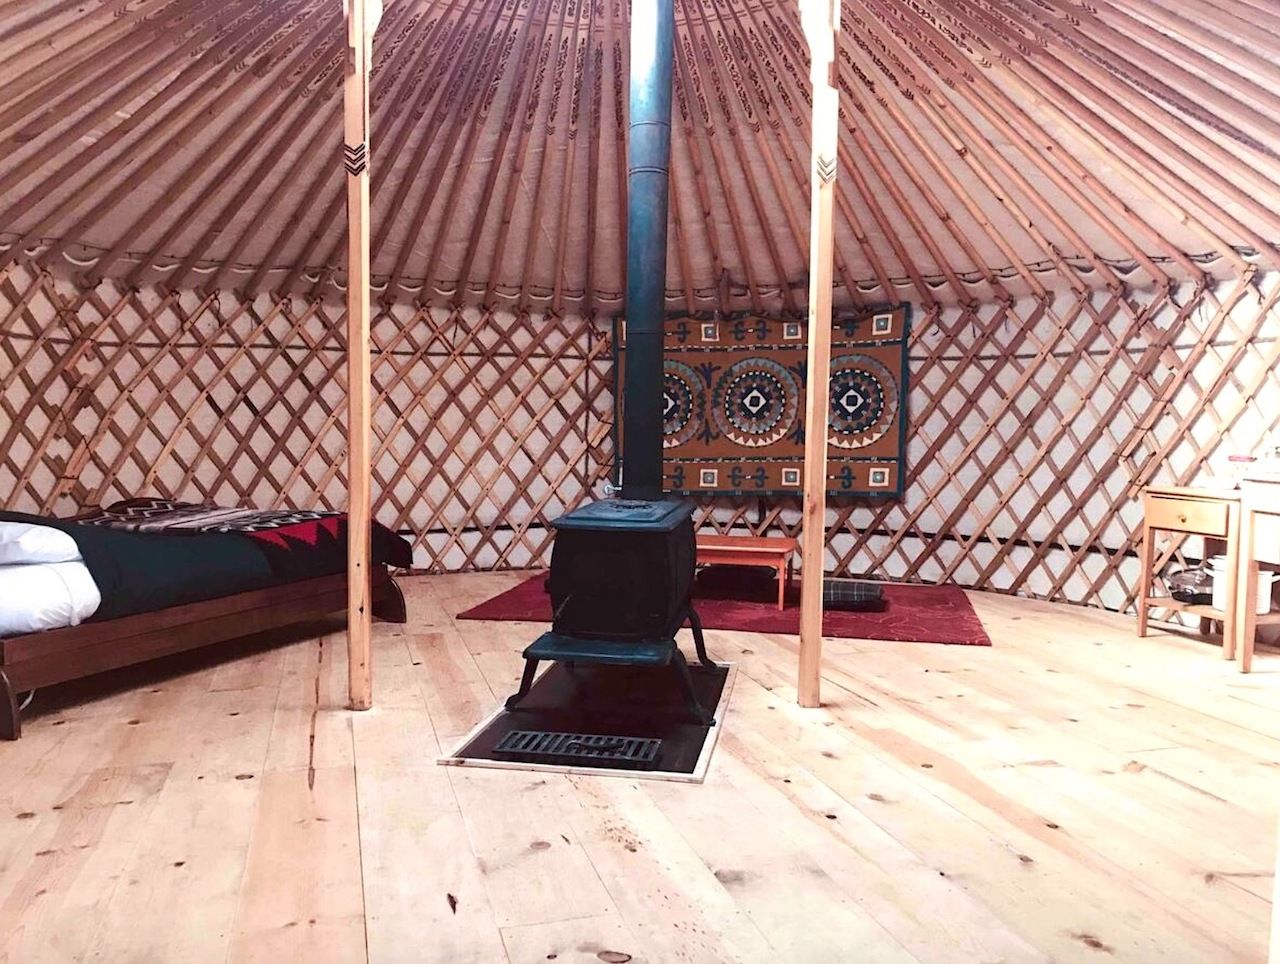 The uncluttered interior of a modern yurt with a wood stove and double bed